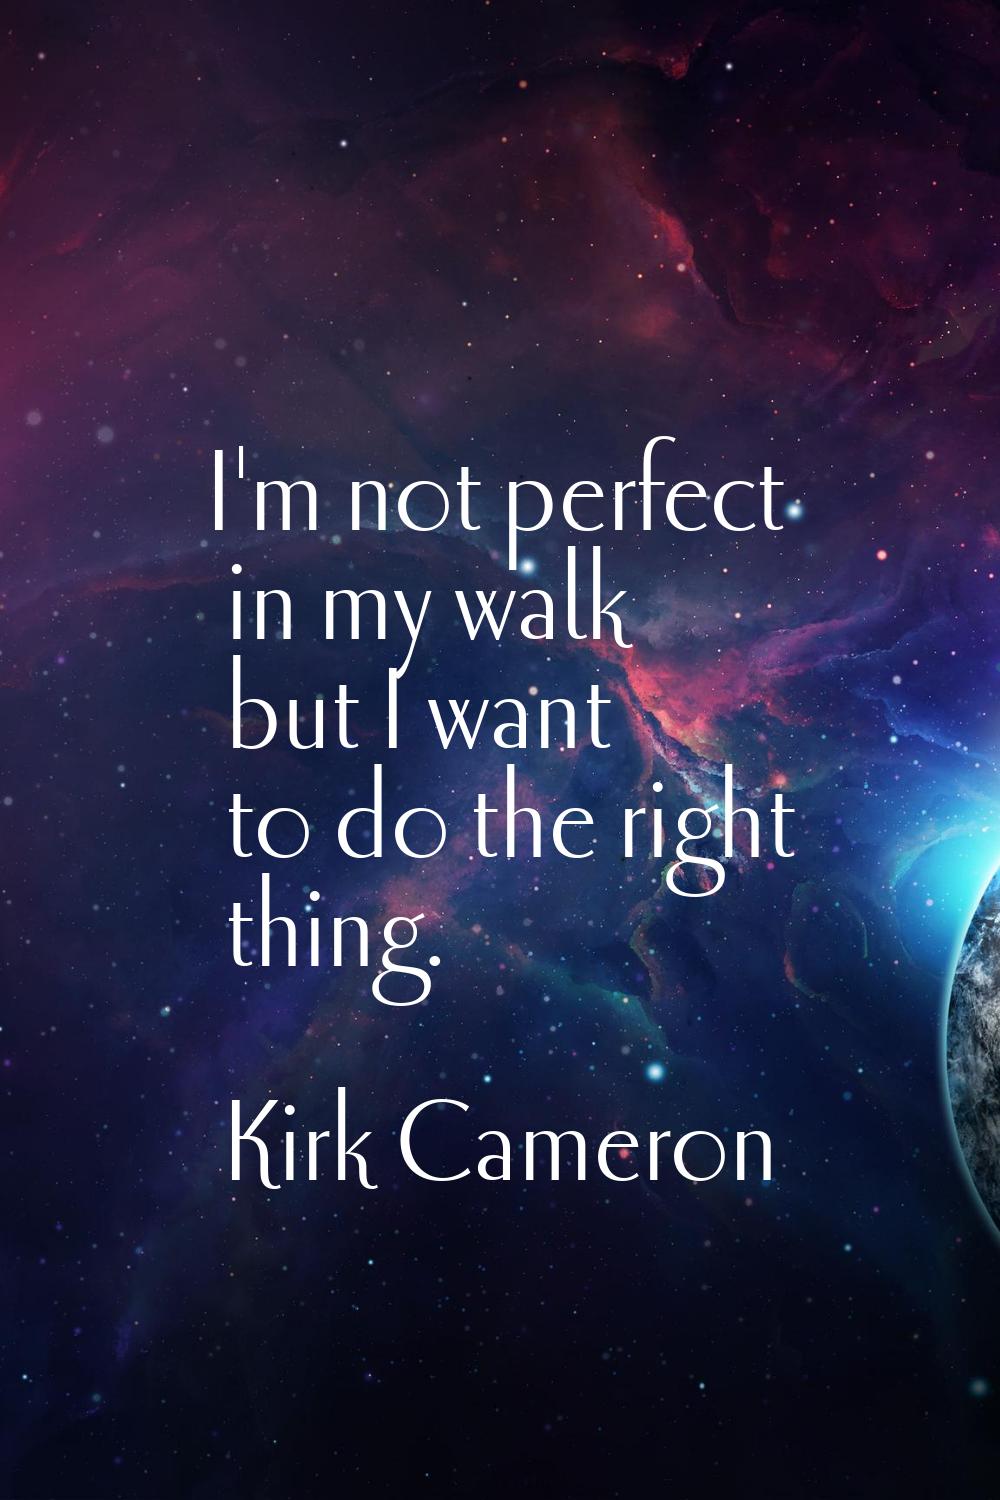 I'm not perfect in my walk but I want to do the right thing.